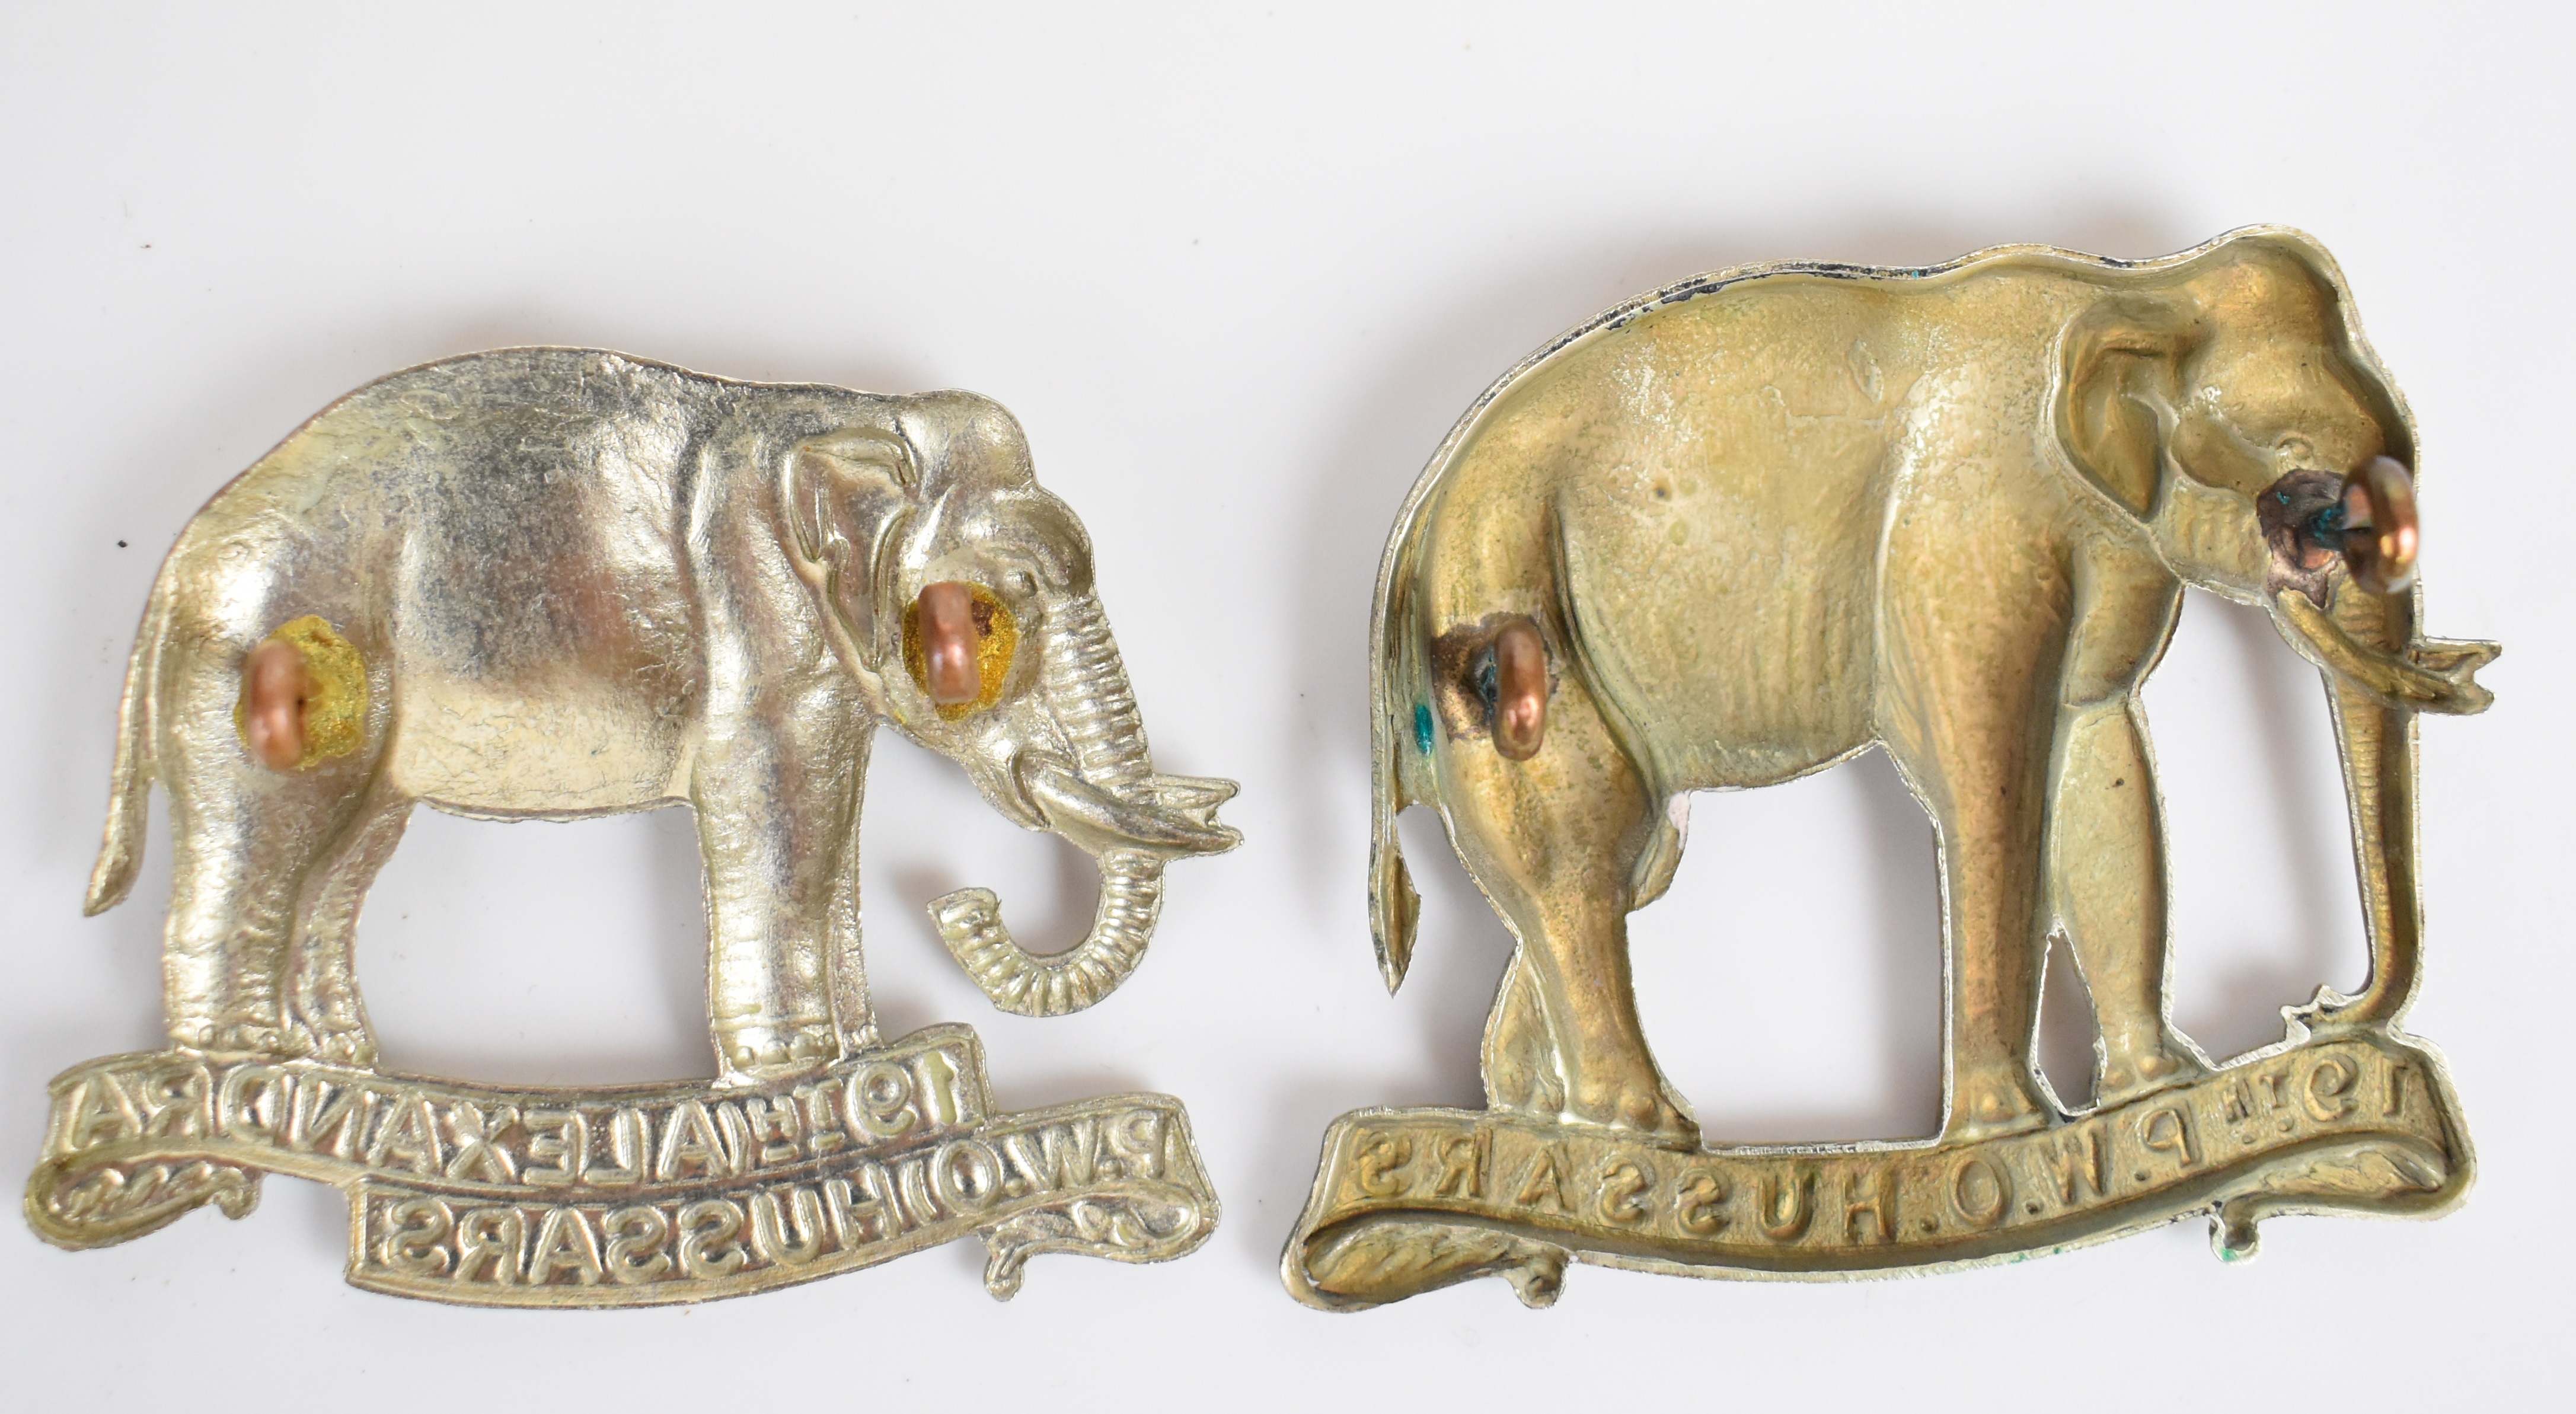 Two British Army 19th Hussars elephant design cap badges - Image 2 of 2